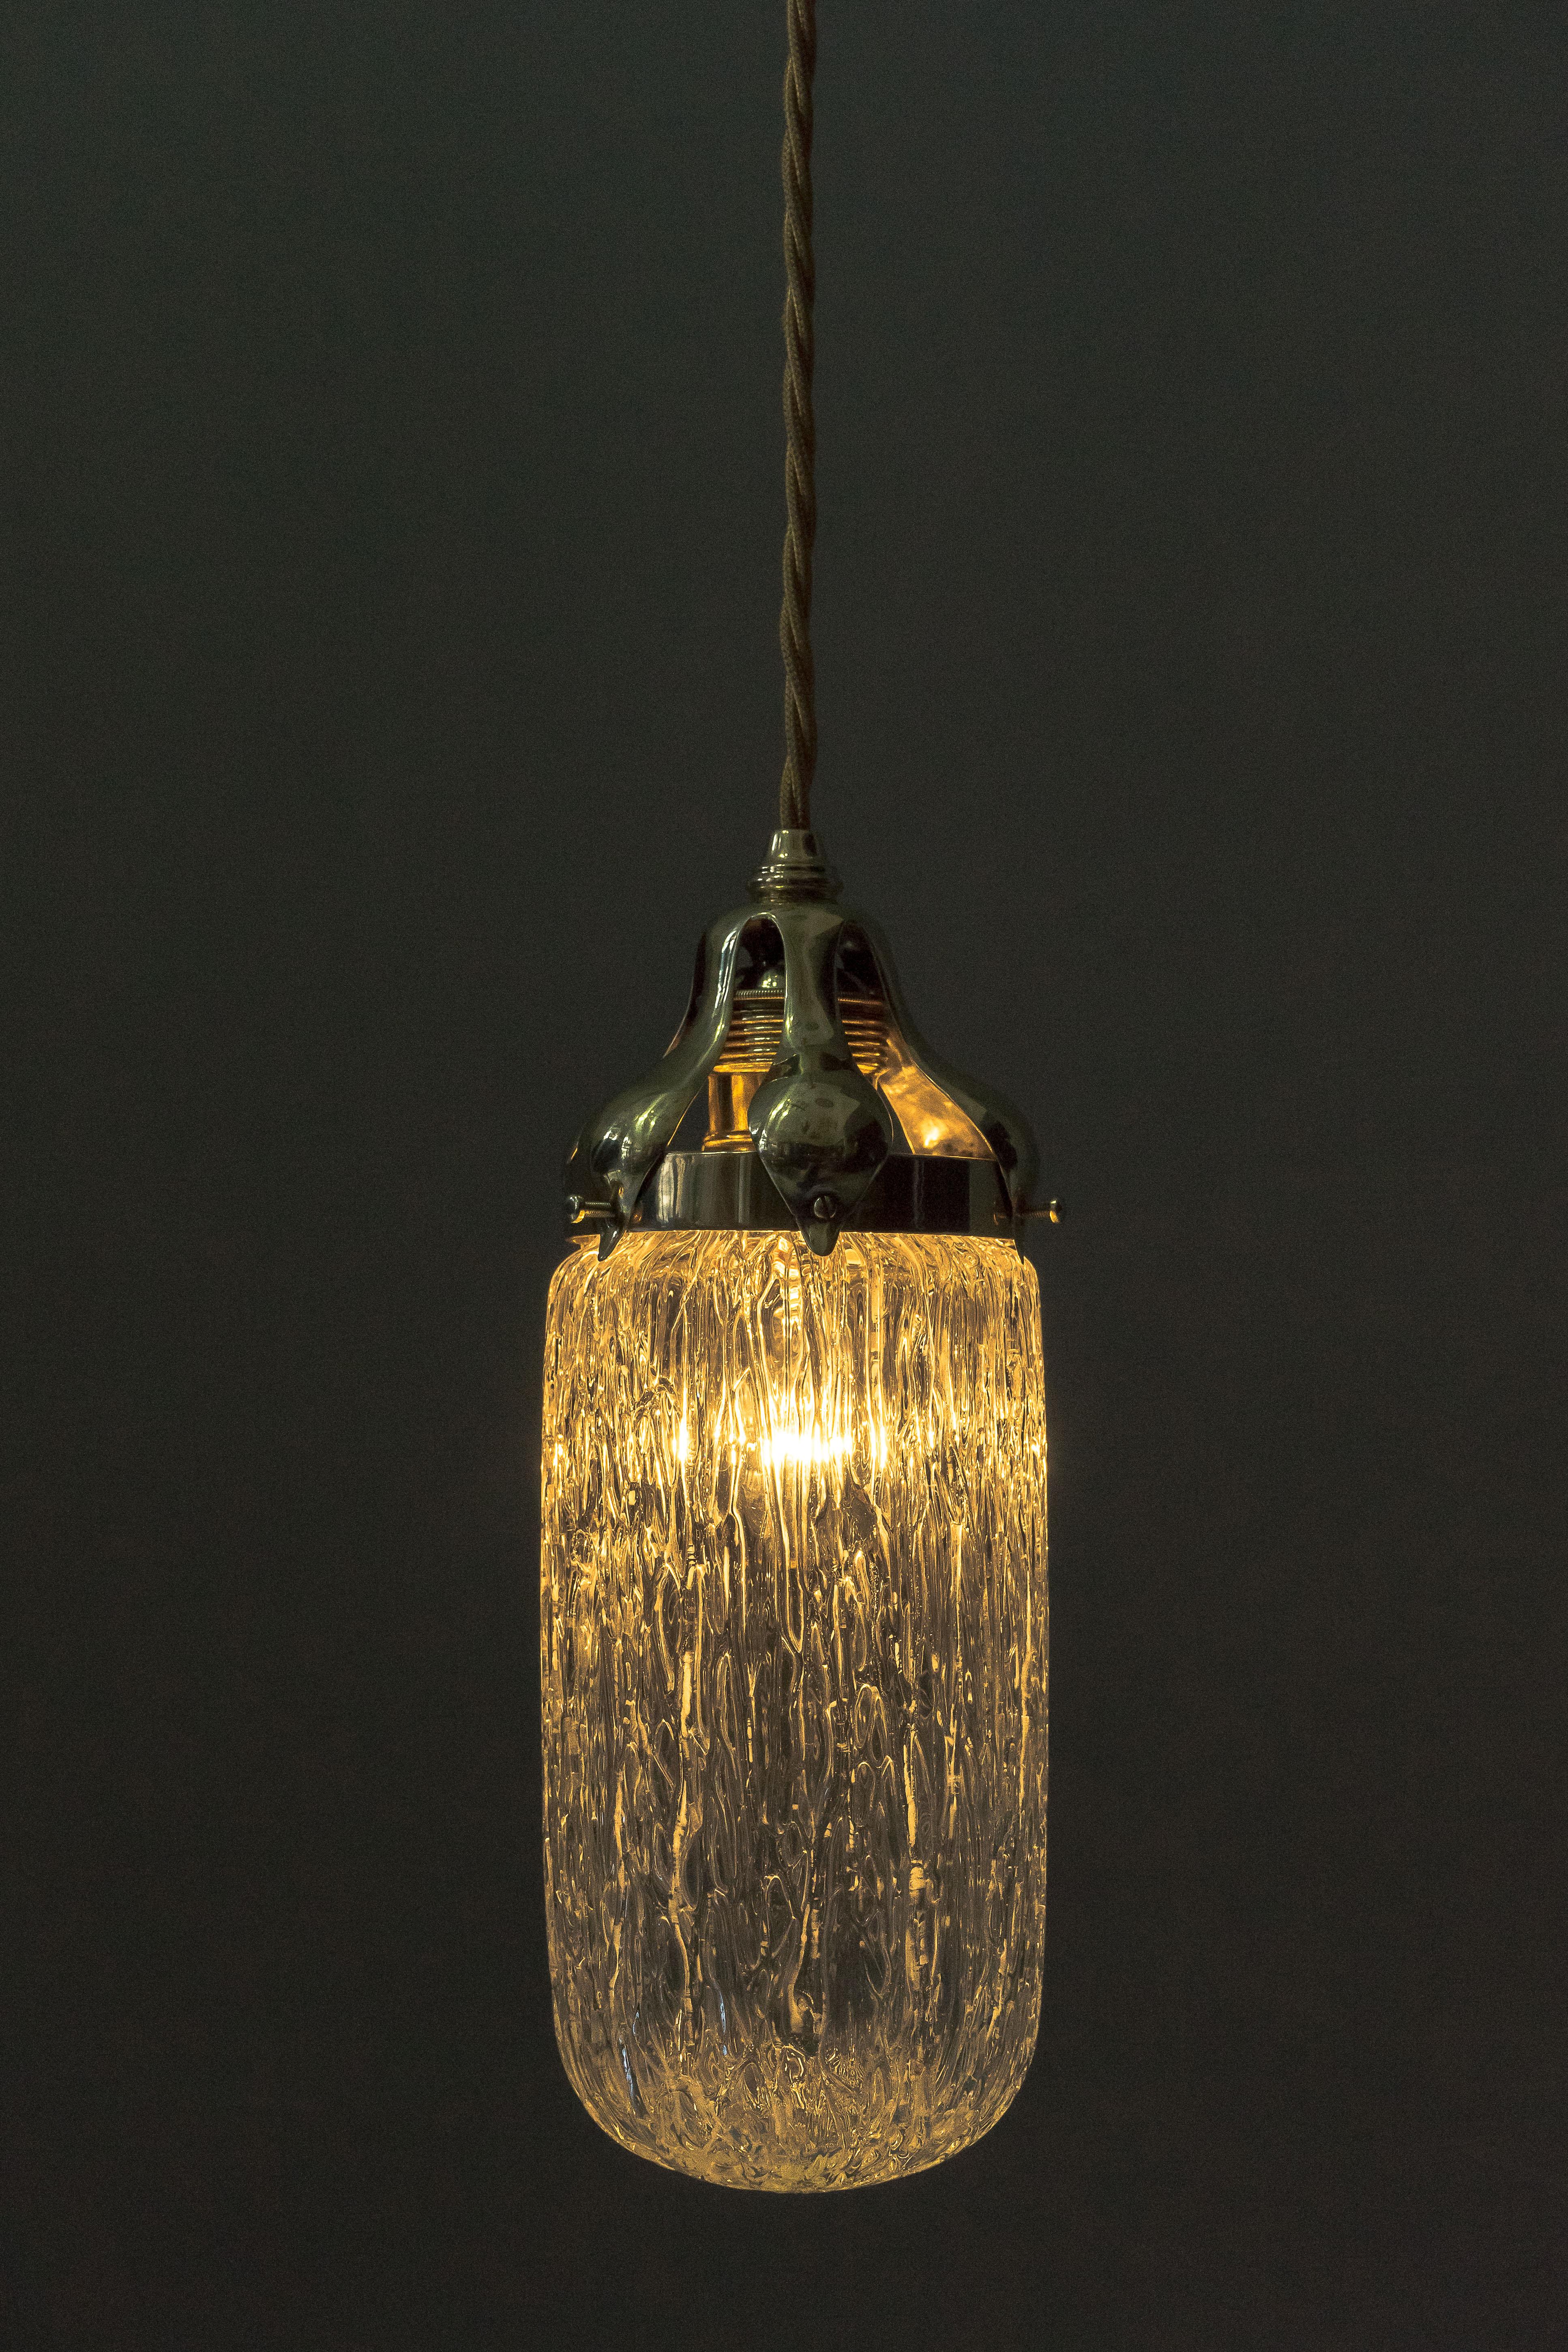 Early 20th Century Leopold Bauer Hanging Lamp with Loetz Witwe “Blitzglas” Shade, circa 1905 For Sale